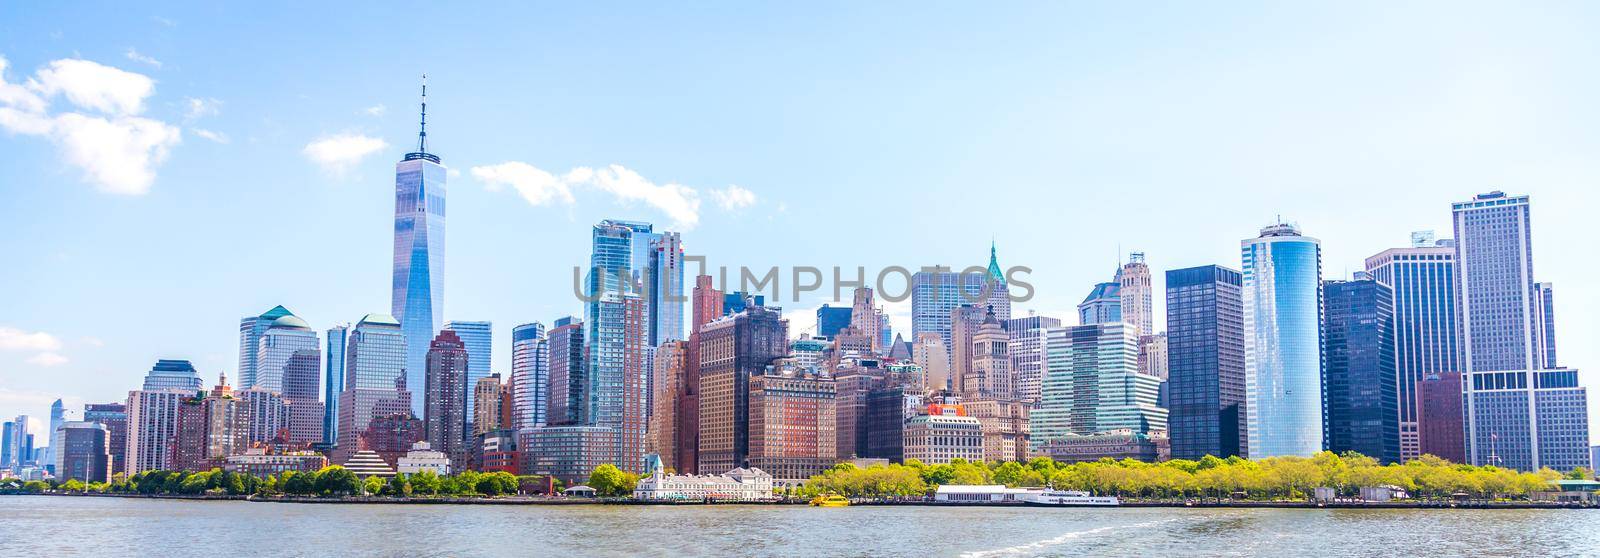 Skyline panorama of downtown Financial District and the Lower Manhattan, New York City, USA